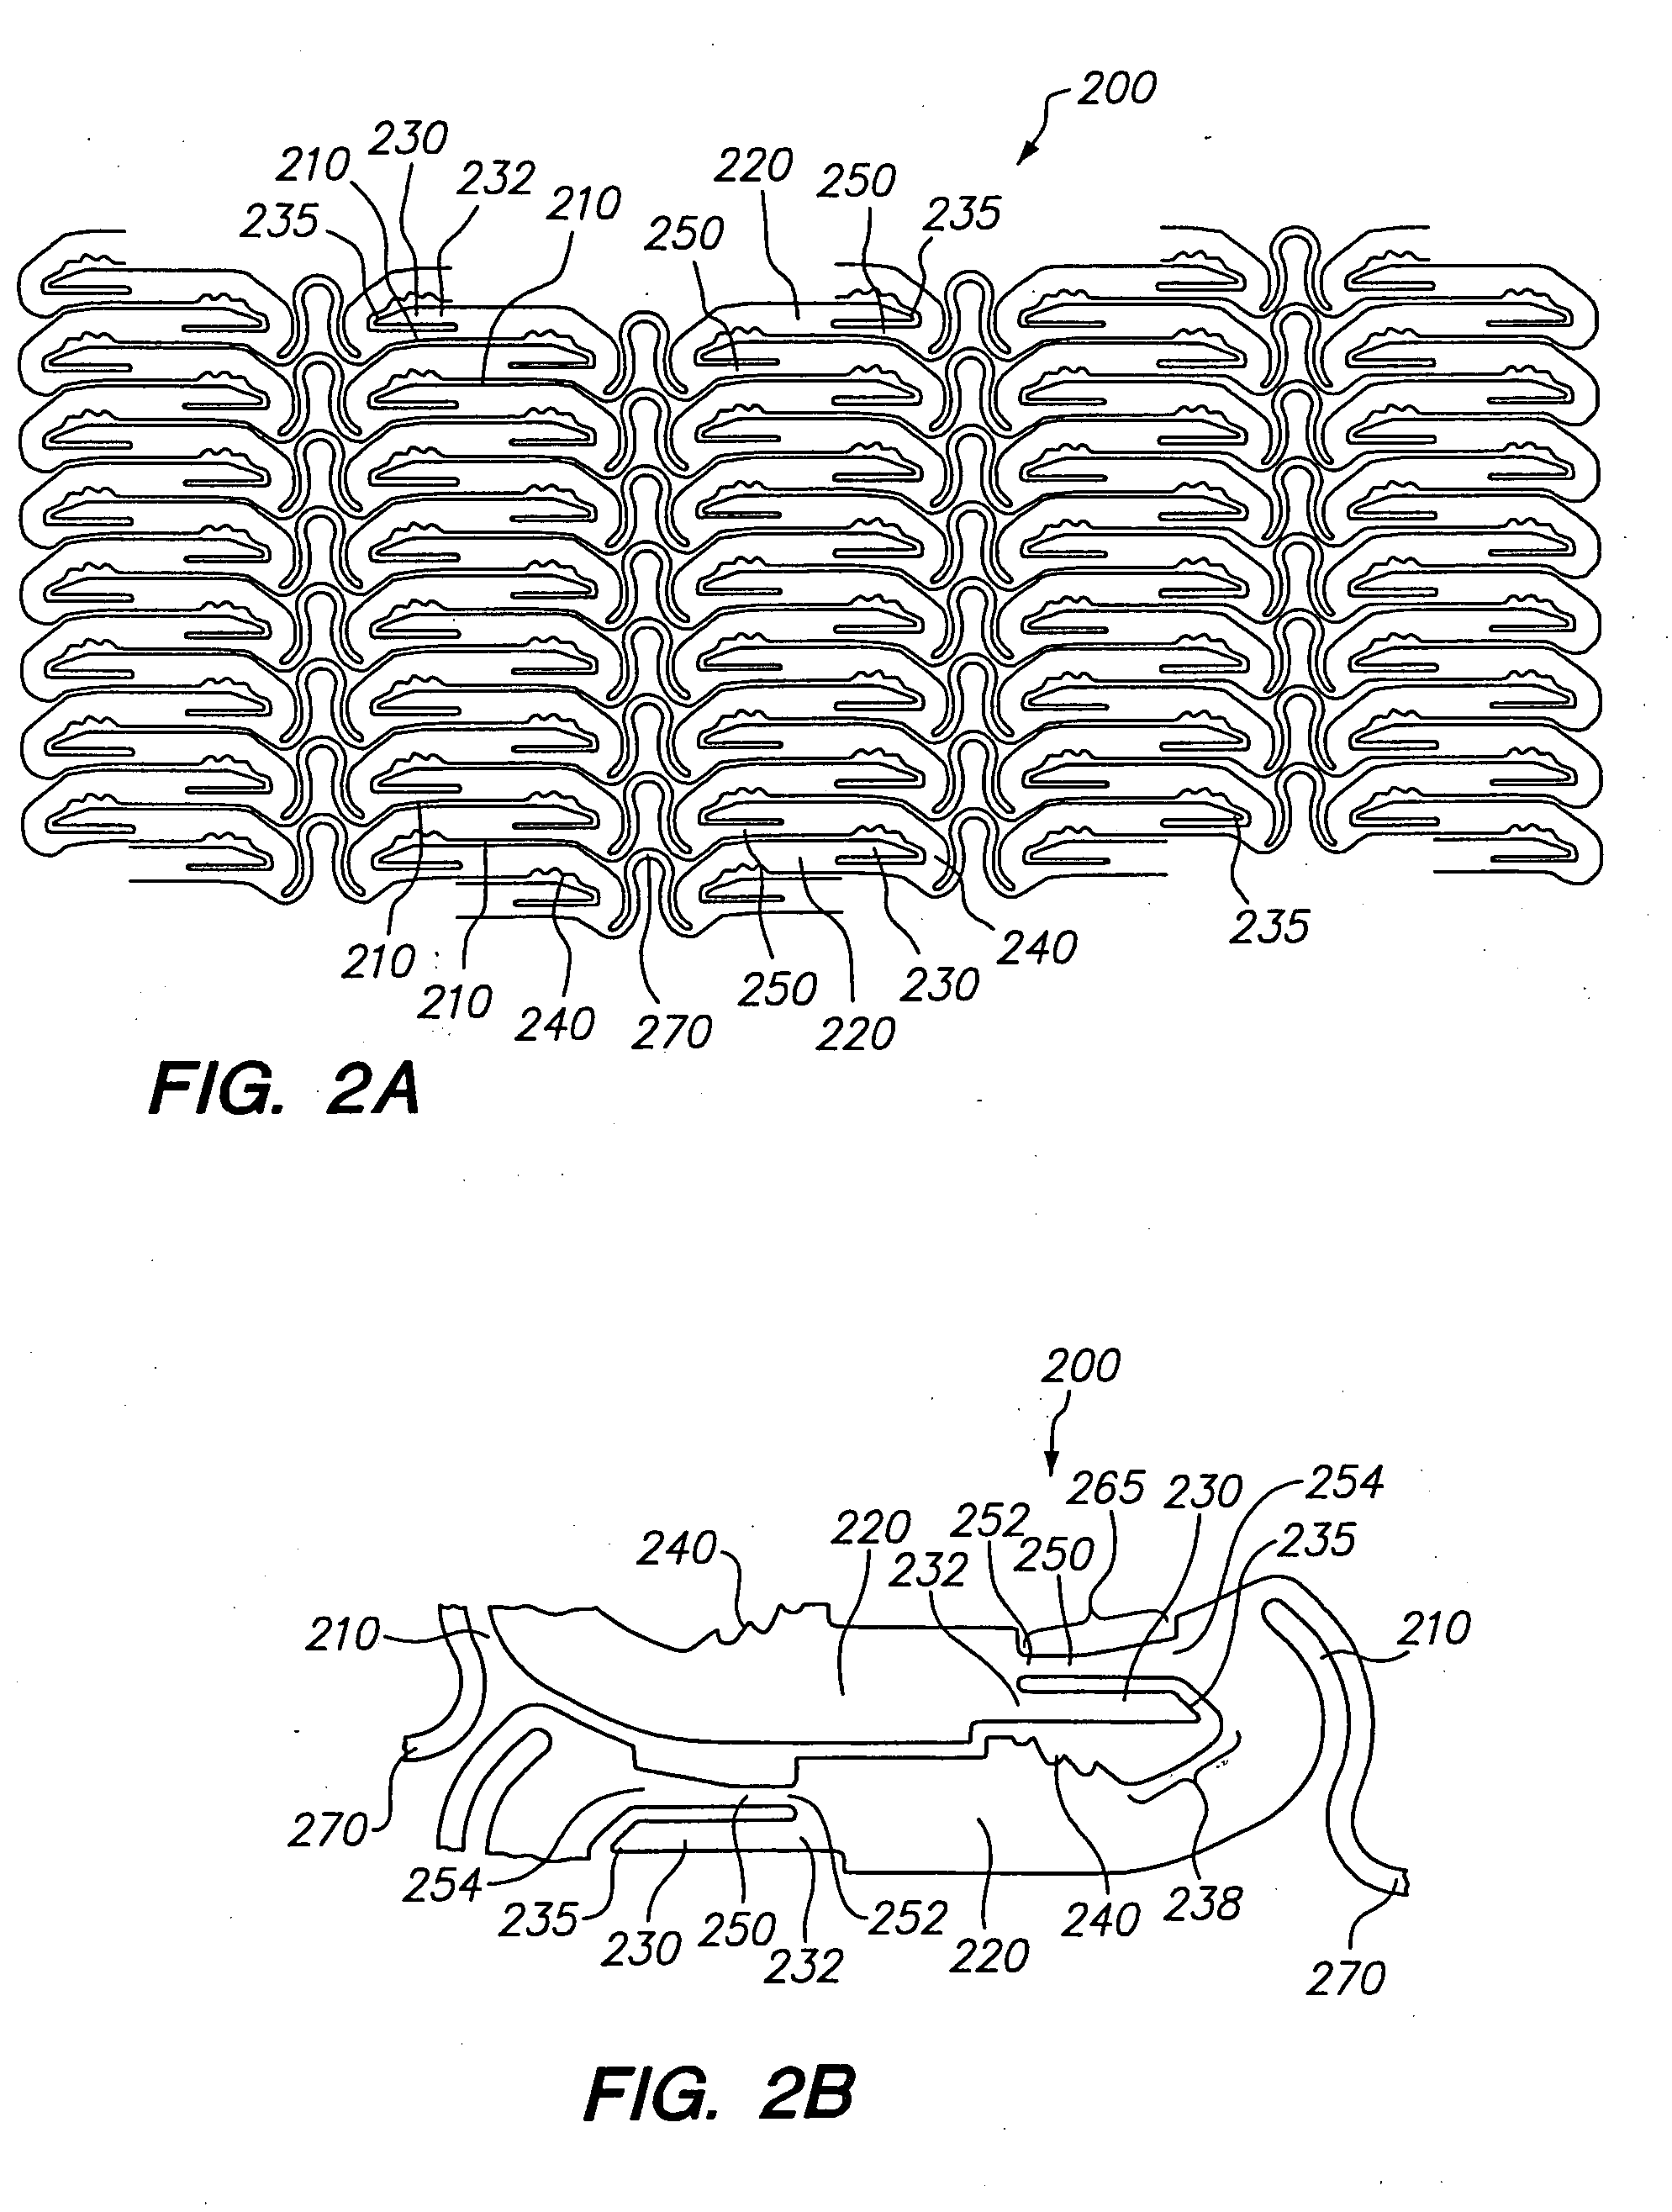 Expandable medical device with locking mechanism